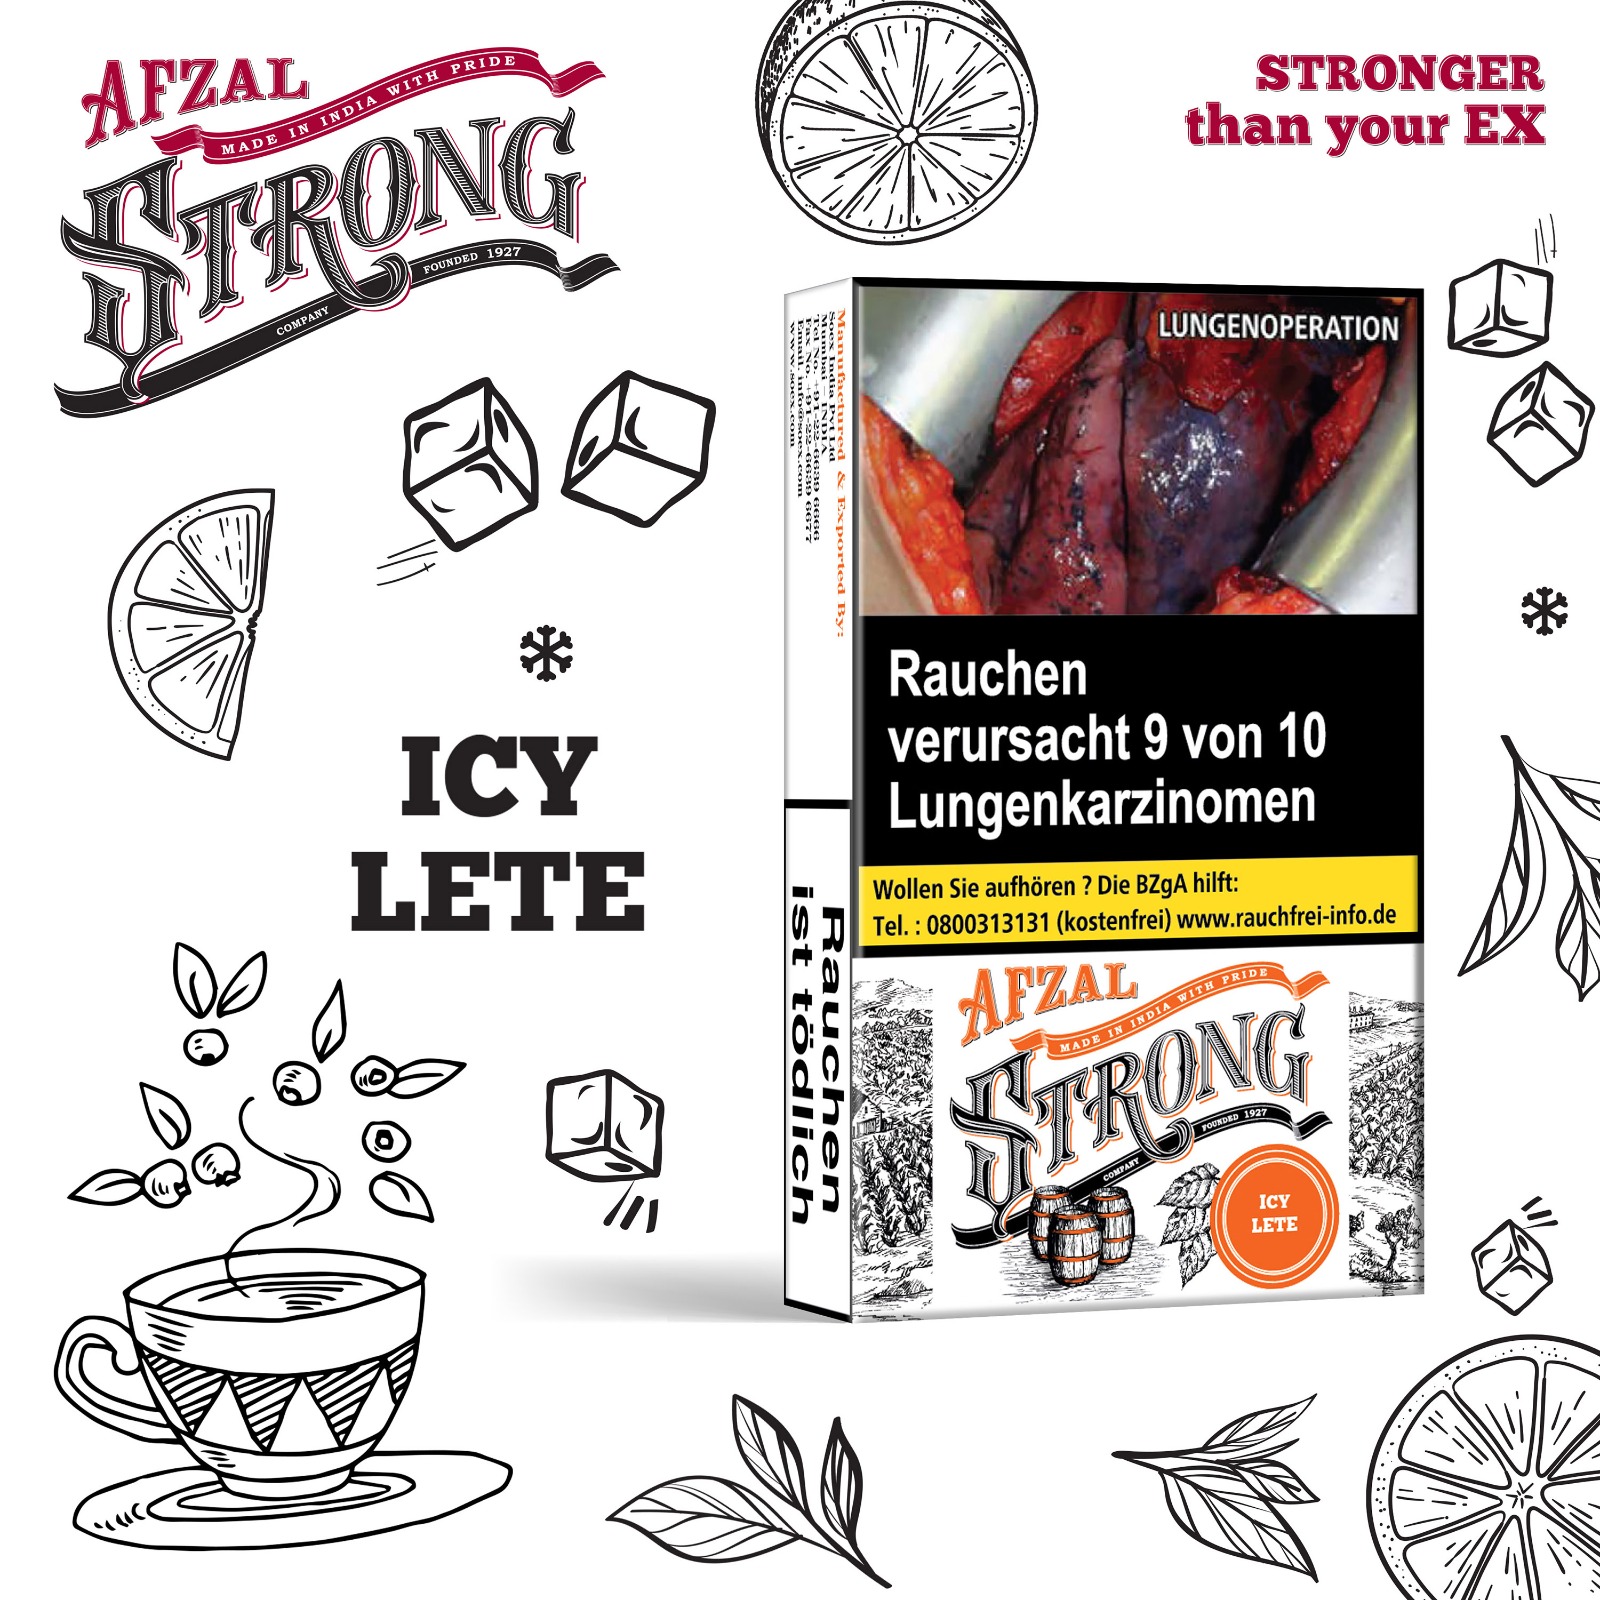 ICY LT "XTREME" | AFZAL STRONG